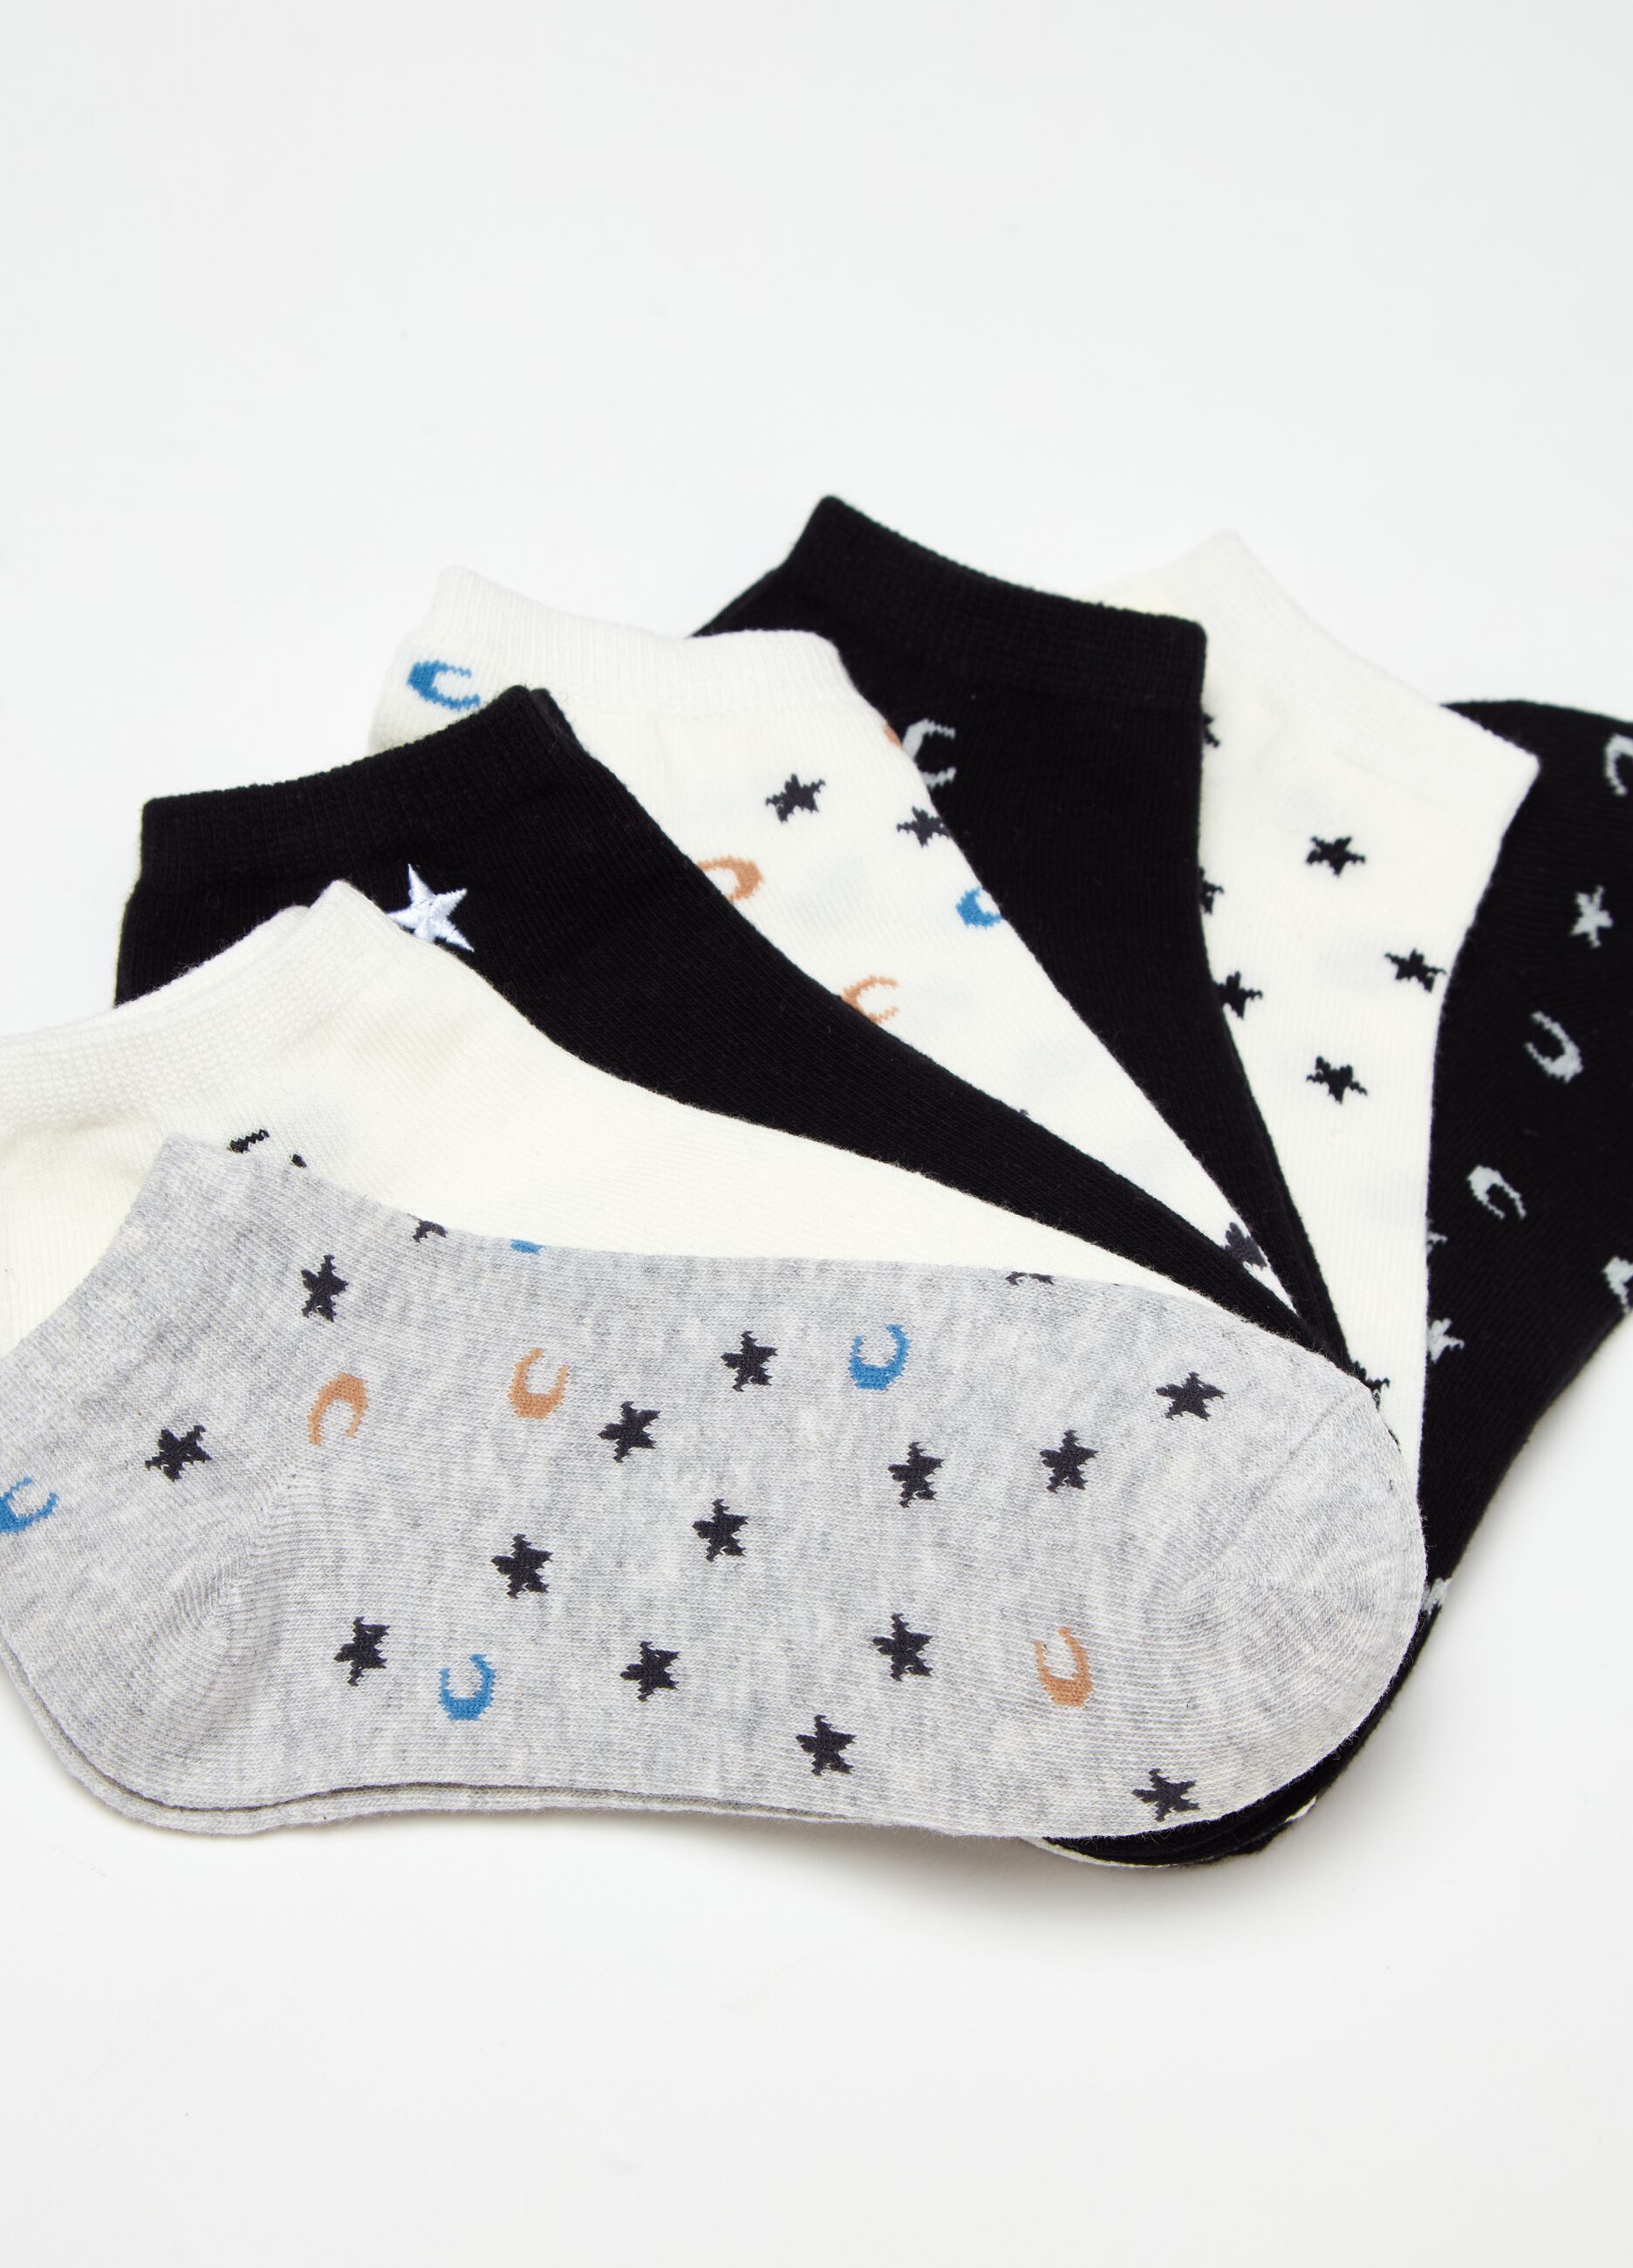 Seven-pair pack shoe liners with stars and moon